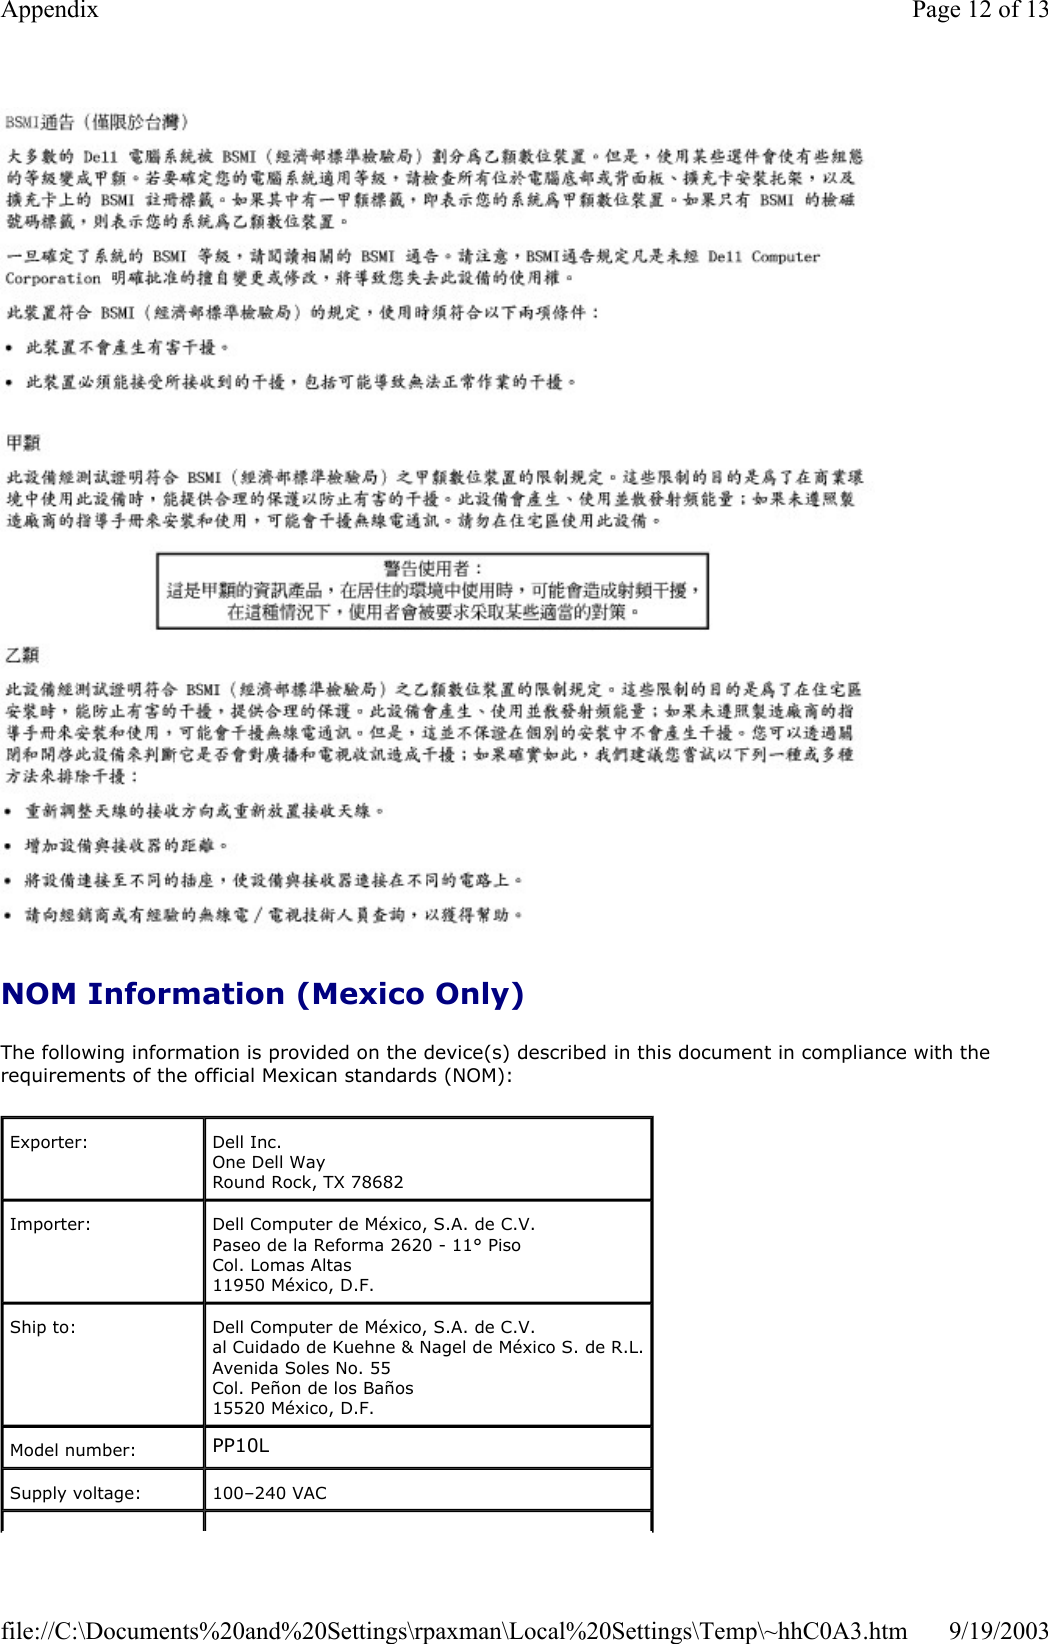   NOM Information (Mexico Only) The following information is provided on the device(s) described in this document in compliance with the requirements of the official Mexican standards (NOM): Exporter:   Dell Inc. One Dell Way Round Rock, TX 78682 Importer:  Dell Computer de México, S.A. de C.V.  Paseo de la Reforma 2620 - 11° Piso  Col. Lomas Altas  11950 México, D.F.  Ship to:  Dell Computer de México, S.A. de C.V.  al Cuidado de Kuehne &amp; Nagel de México S. de R.L. Avenida Soles No. 55 Col. Peñon de los Baños 15520 México, D.F. Model number:  PP10L Supply voltage:  100–240 VAC Page 12 of 13Appendix9/19/2003file://C:\Documents%20and%20Settings\rpaxman\Local%20Settings\Temp\~hhC0A3.htm